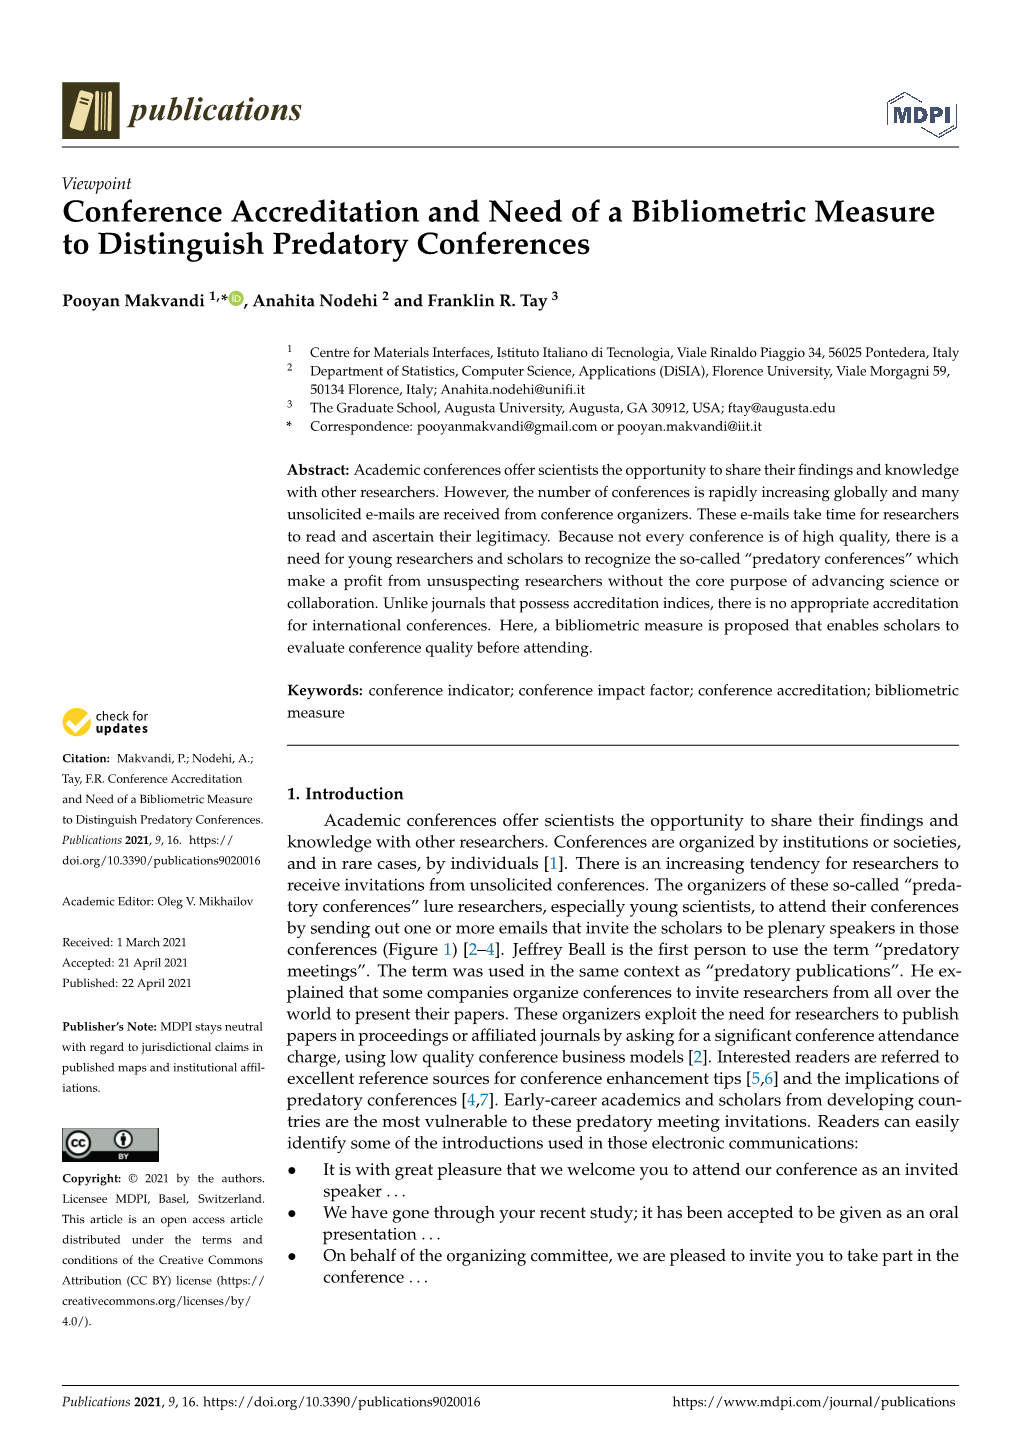 Conference Accreditation and Need of a Bibliometric Measure to Distinguish Predatory Conferences